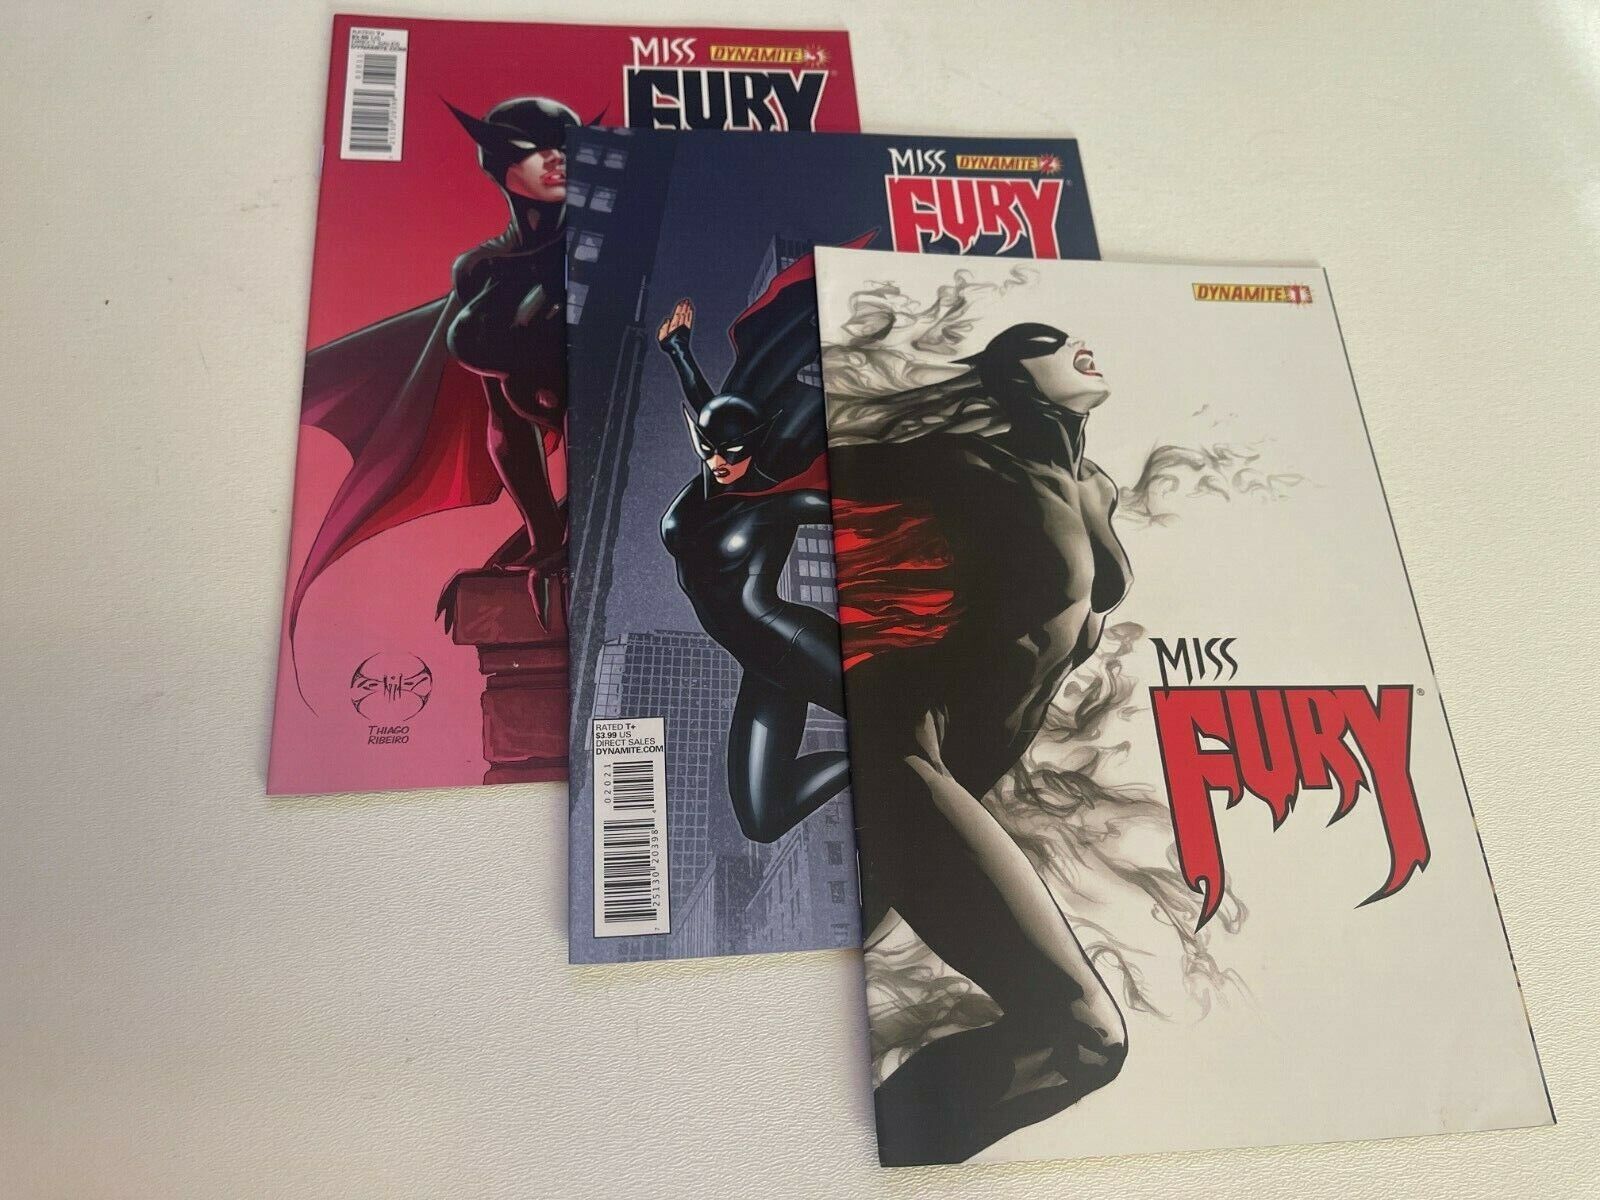 MISS FURY #1-3 (DYNAMITE/2013/ALEX ROSS/VARIANT/1221144) COMPLETE SET LOT OF 3 